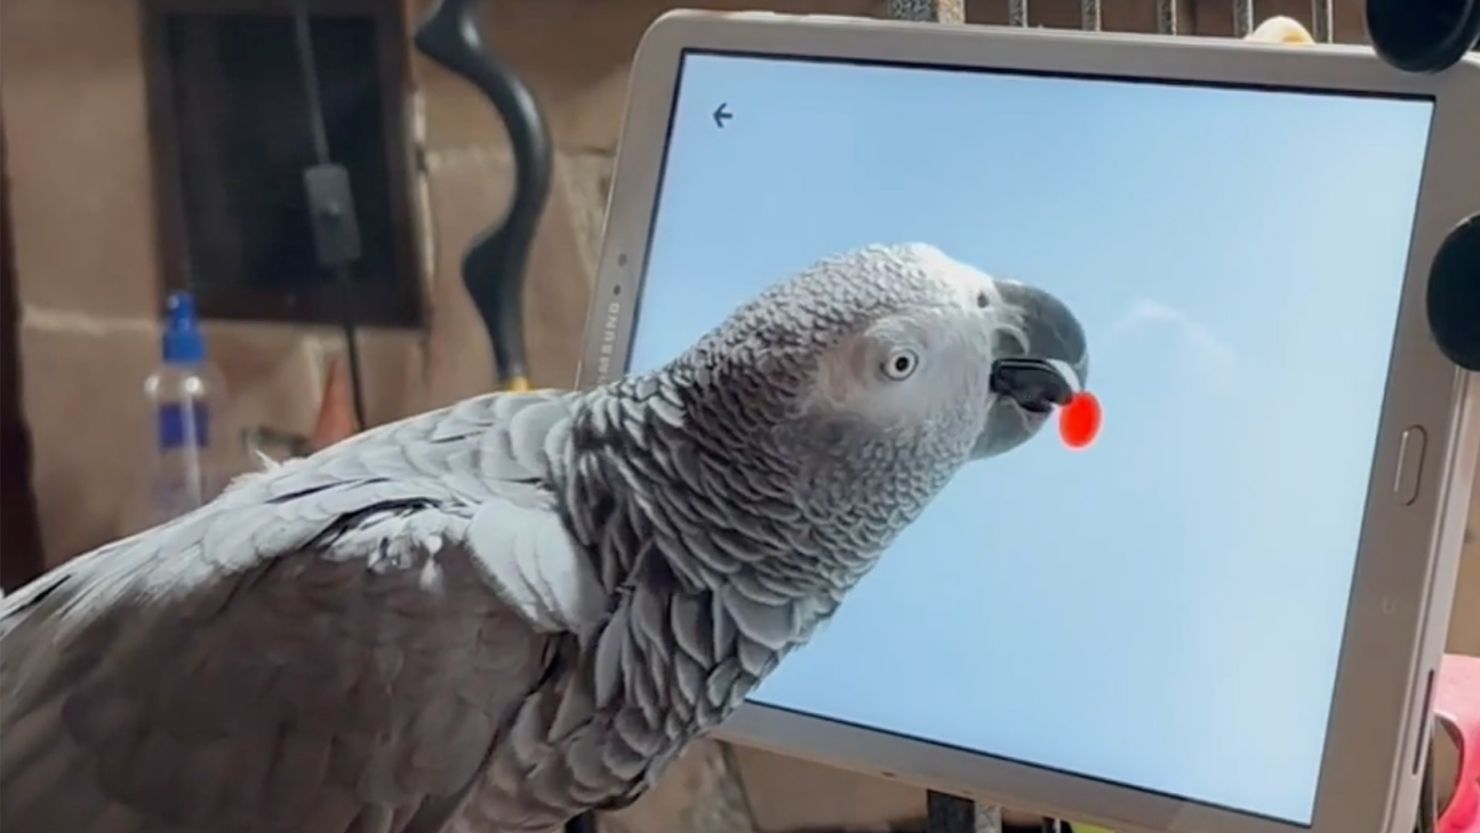 A team of researchers are studying how tablets could be designed to be more bird-friendly.